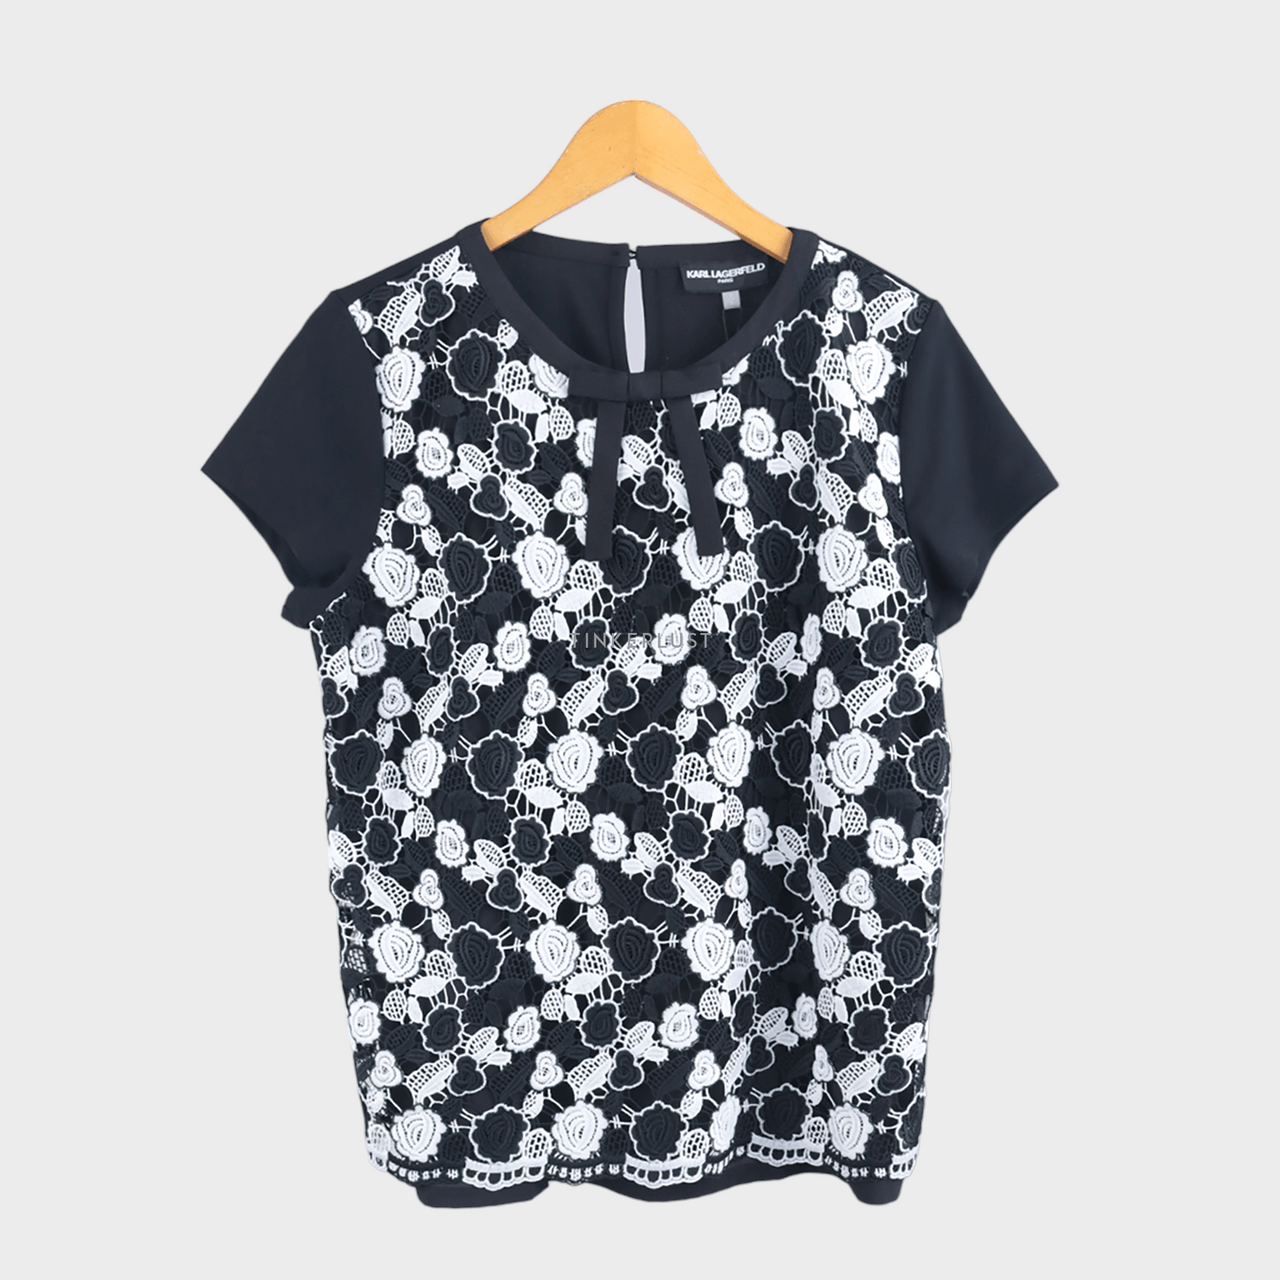 Karl Lagerfeld Floral Embroidered Black Blouse